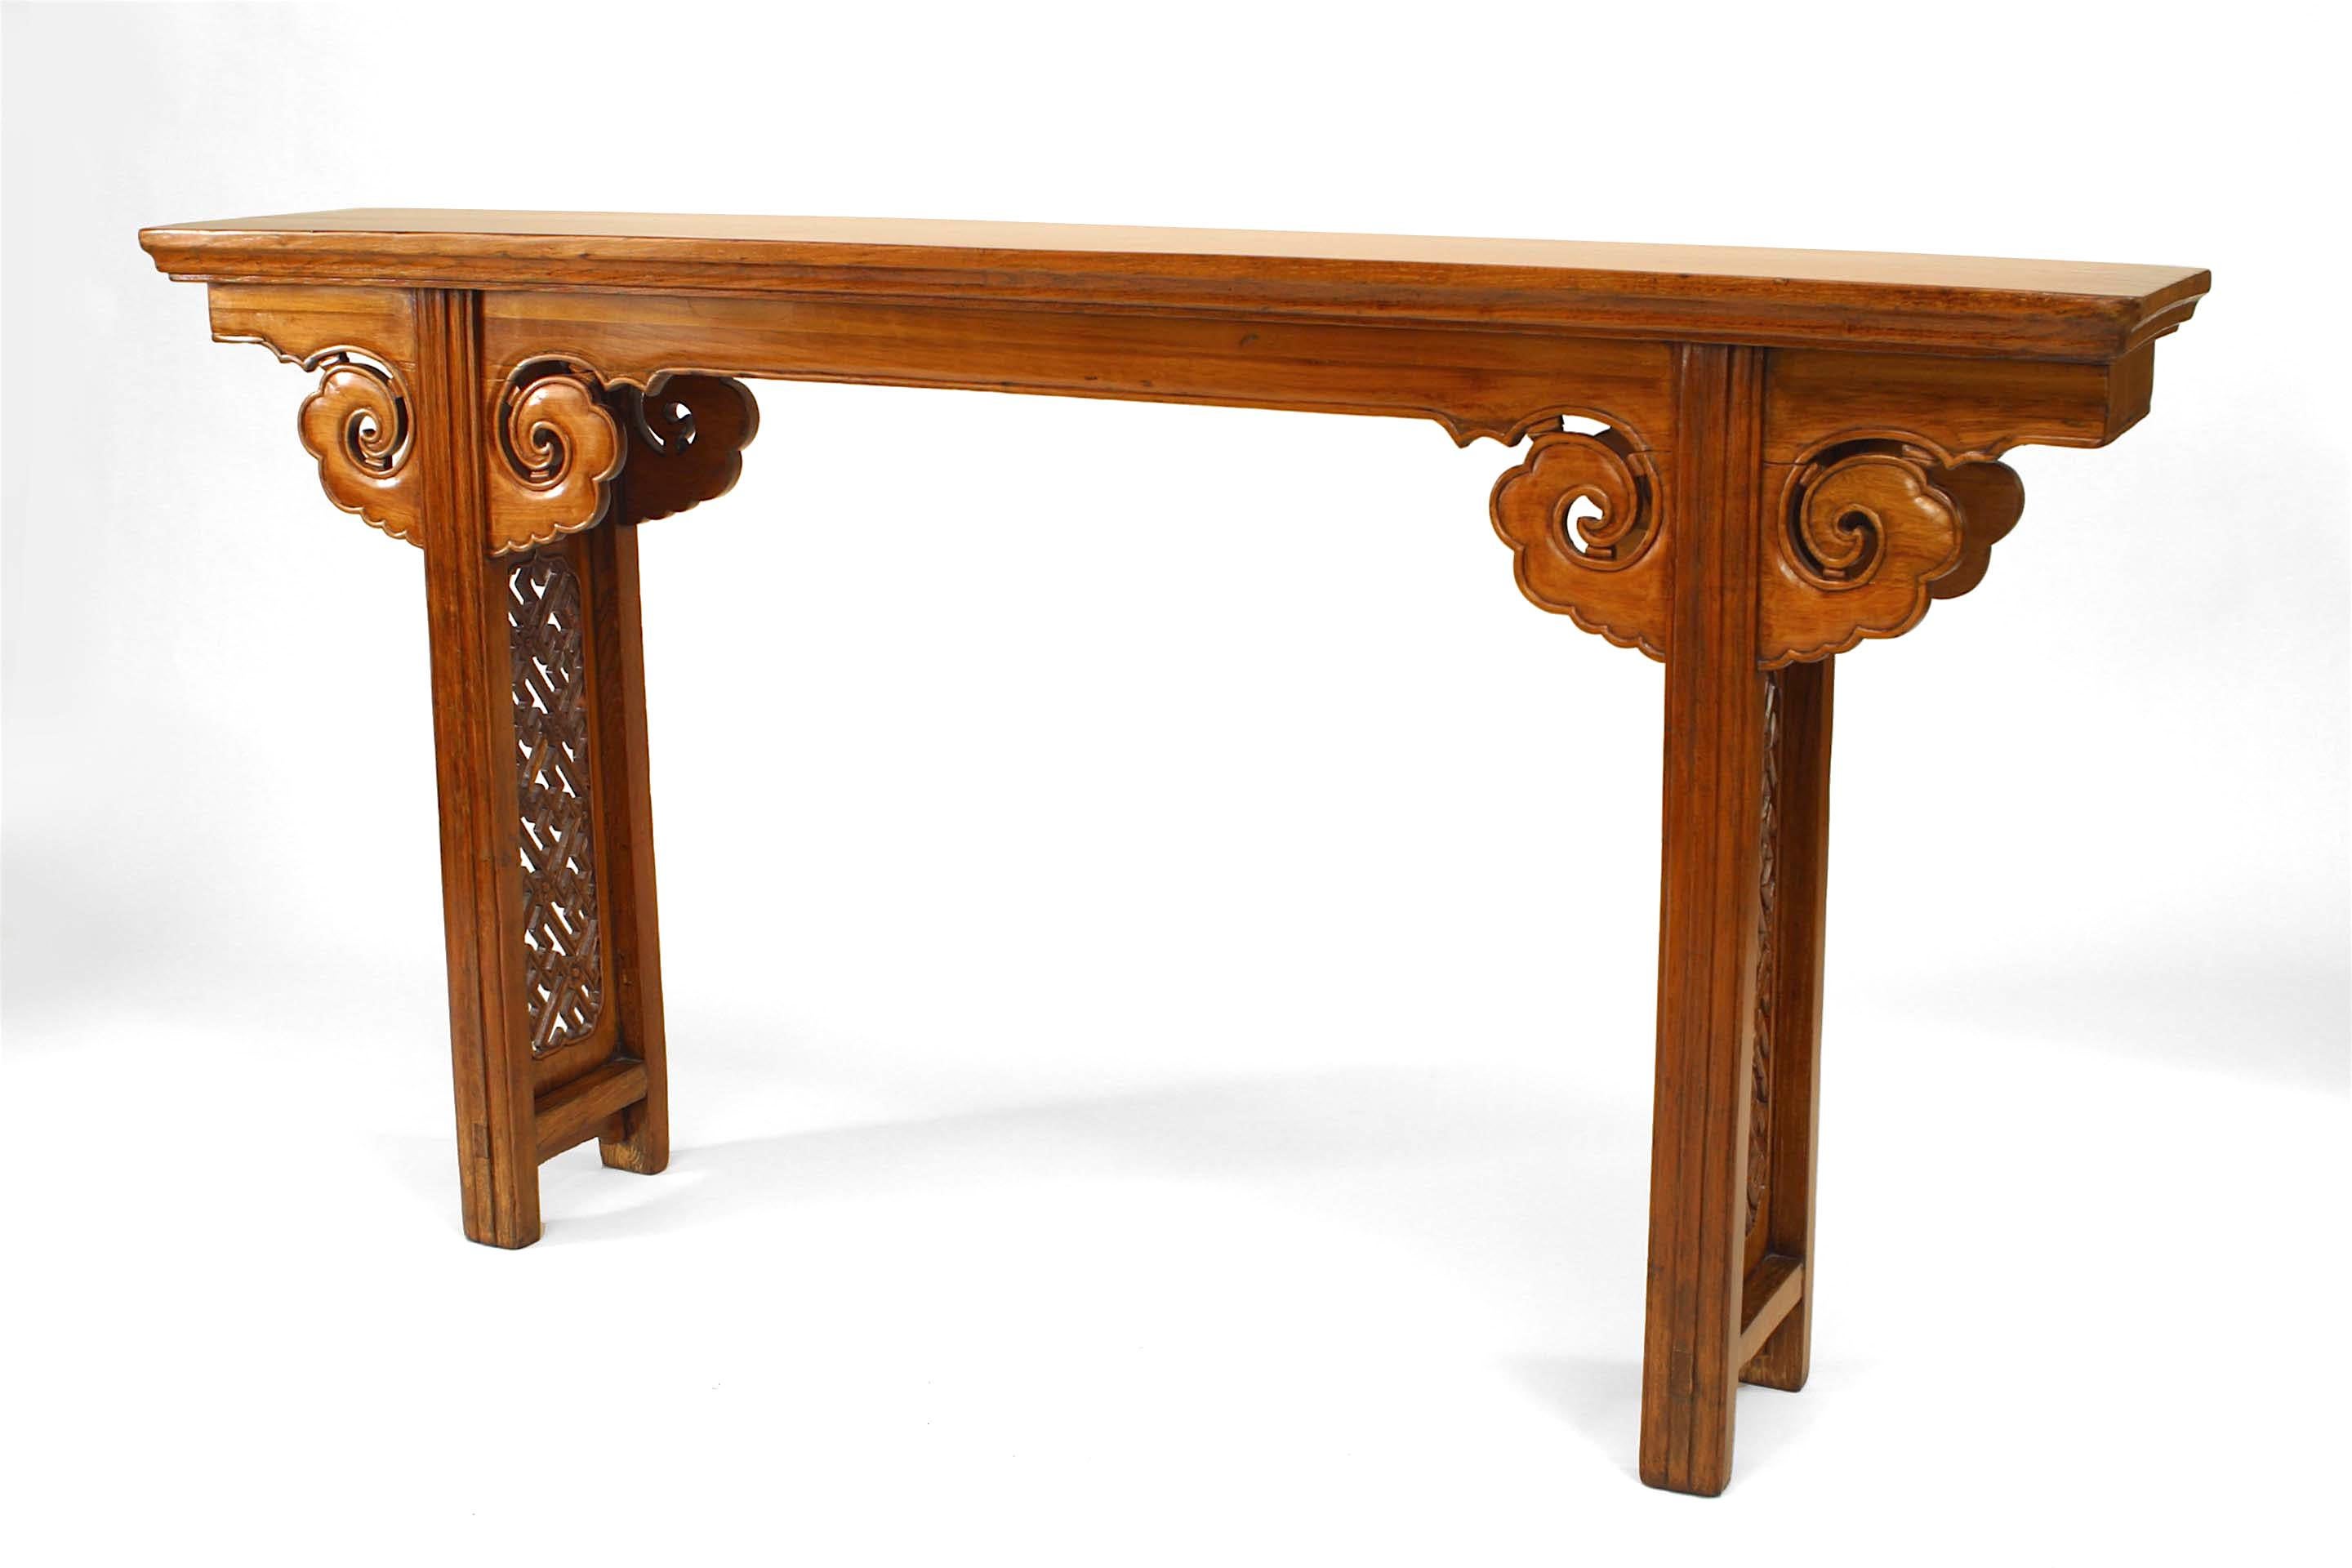 Chinese (18th Century) elmwood (yu-mu) narrow altar style console table with intrically carved geometric design end panels with fluted legs and cloud shaped scroll form spandrels on apron.
